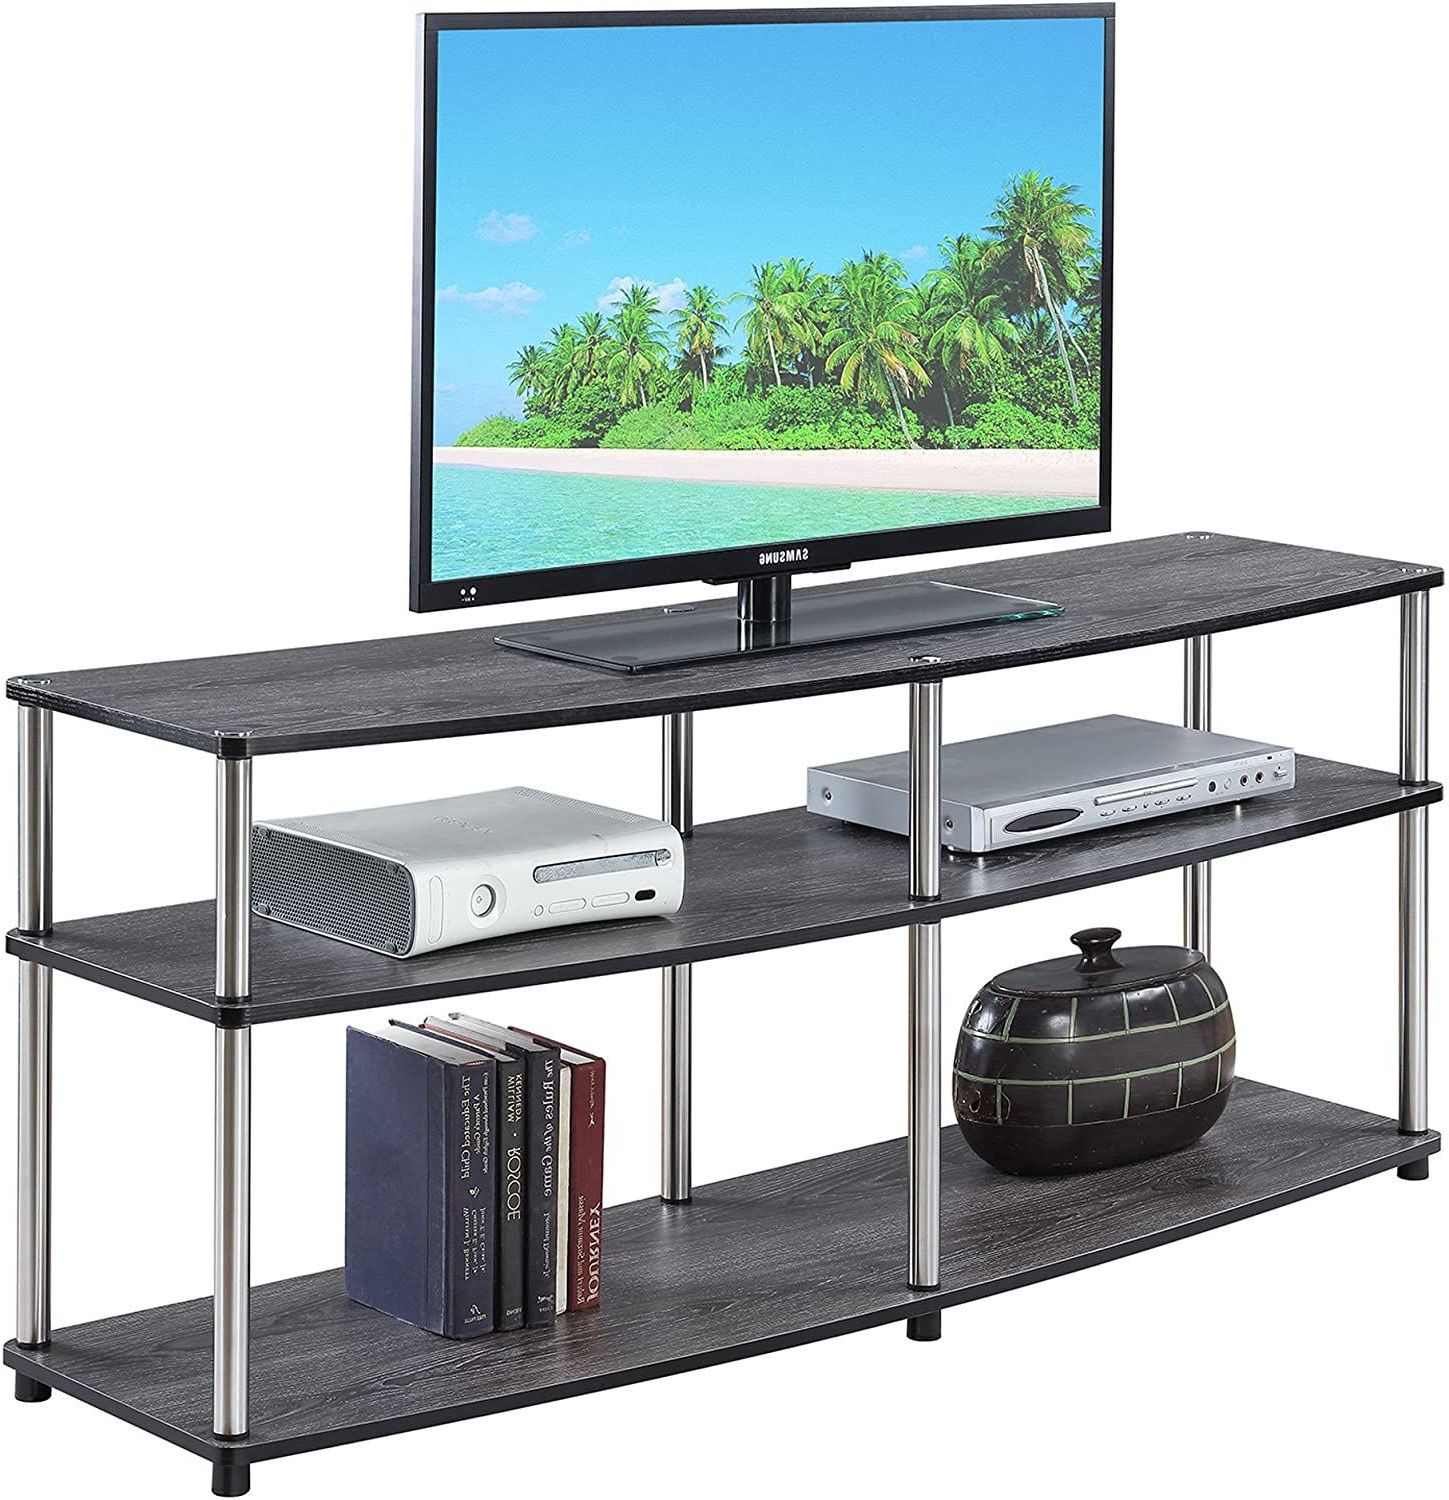 Convenience Concepts Designs2go 3 Tier 60" Tv Stand Throughout Winsome Wood Zena Corner Tv &amp; Media Stands In Espresso Finish (View 9 of 20)